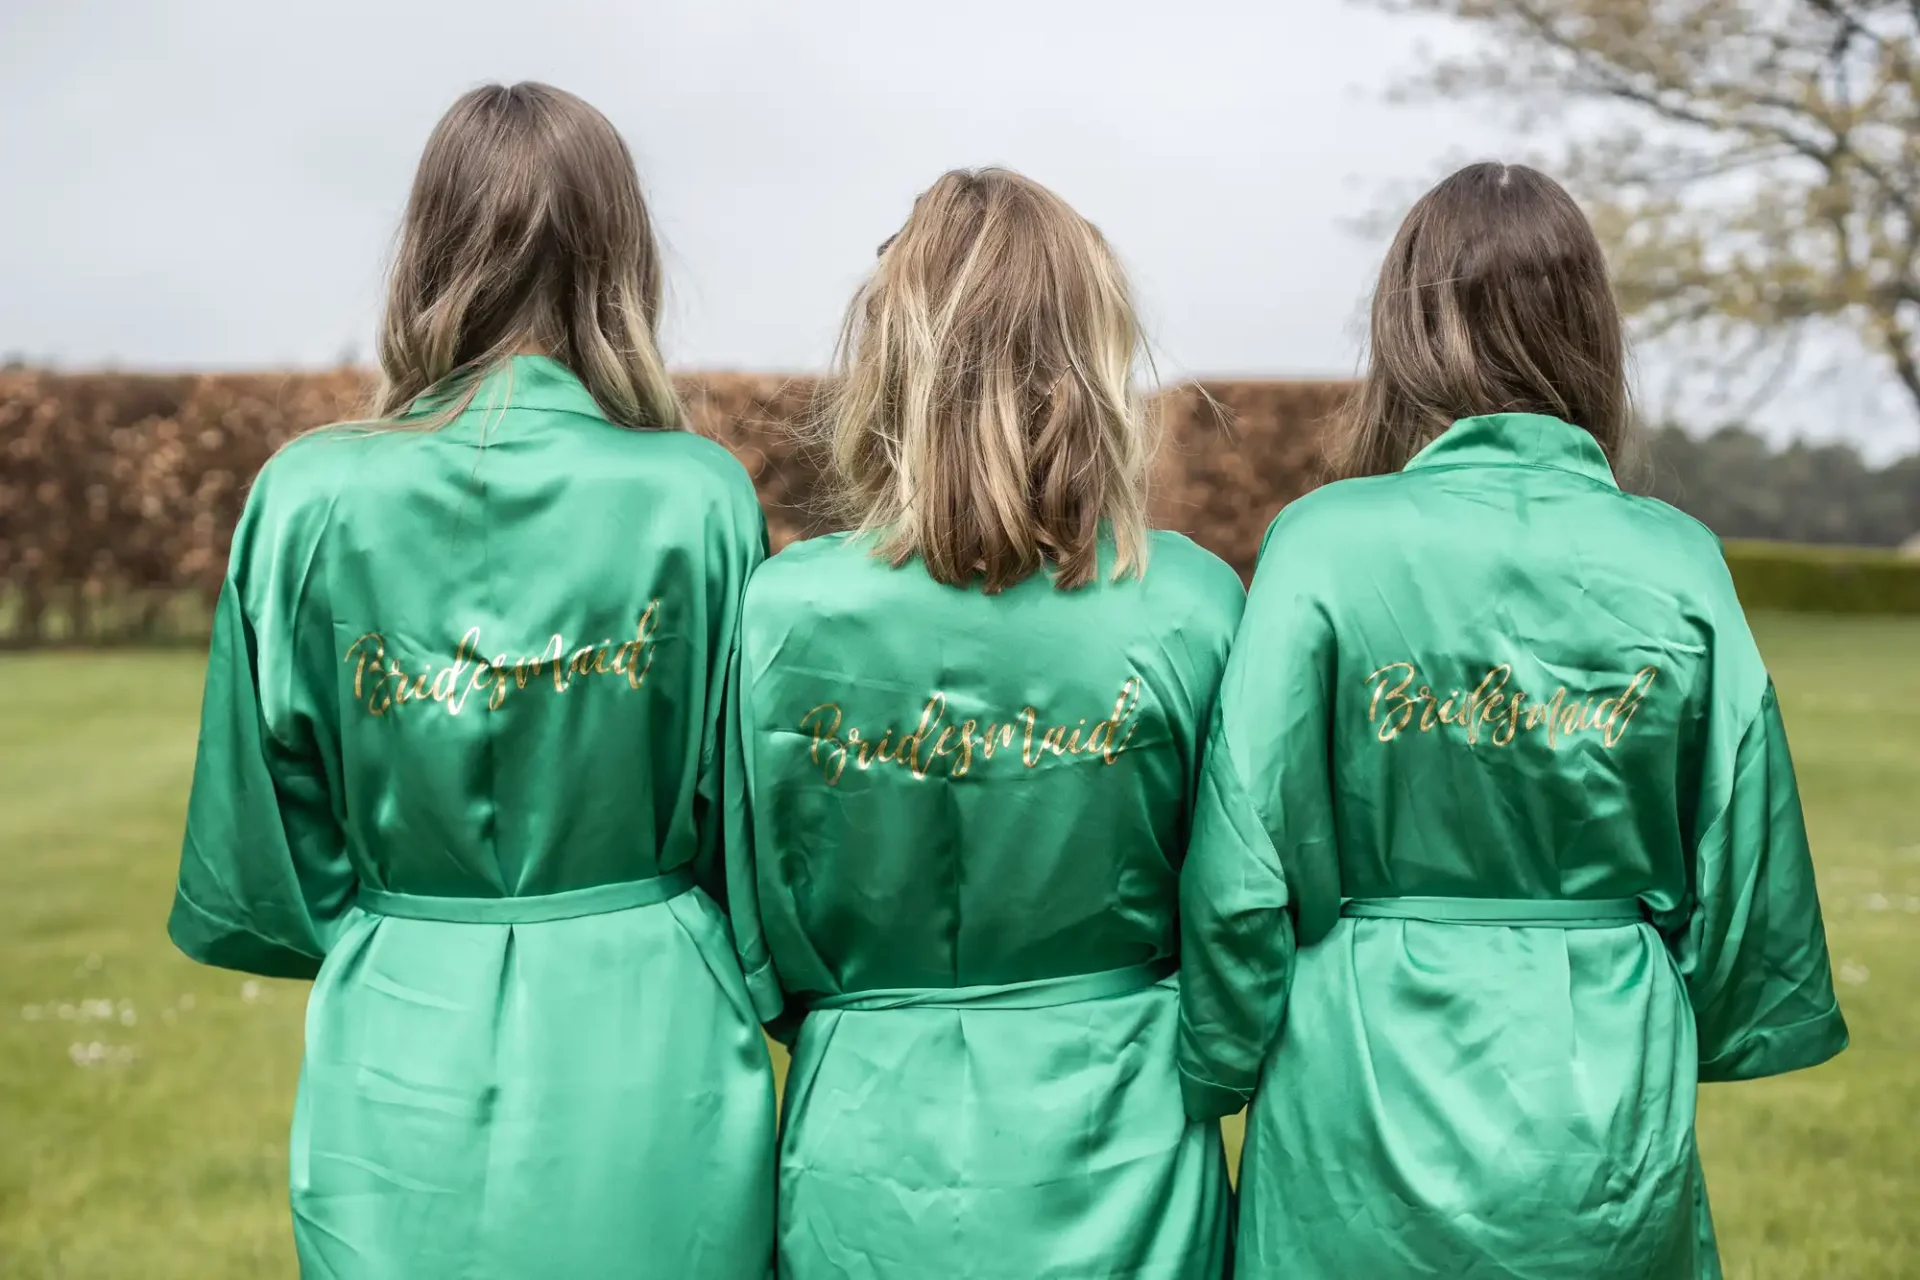 Three women are standing outdoors with their backs to the camera, wearing green robes that have the word "Bridesmaid" embroidered in gold on the back.